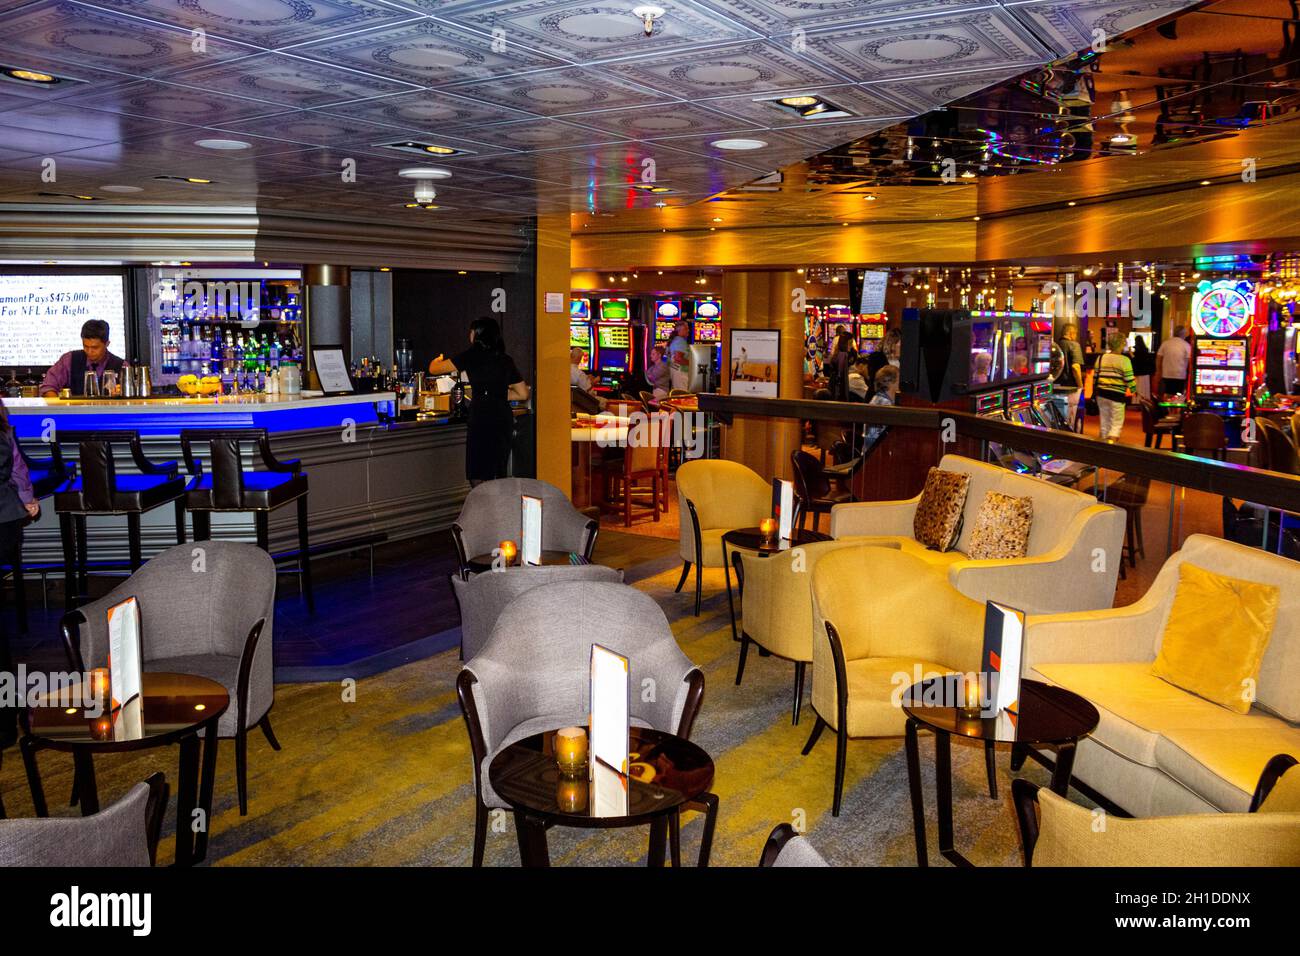 Fort Lauderdale - December 2, 2019: The interior of bar at Holland America cruise ship Eurodam at seaport Port Everglades at Fort Lauderdale, Florida Stock Photo